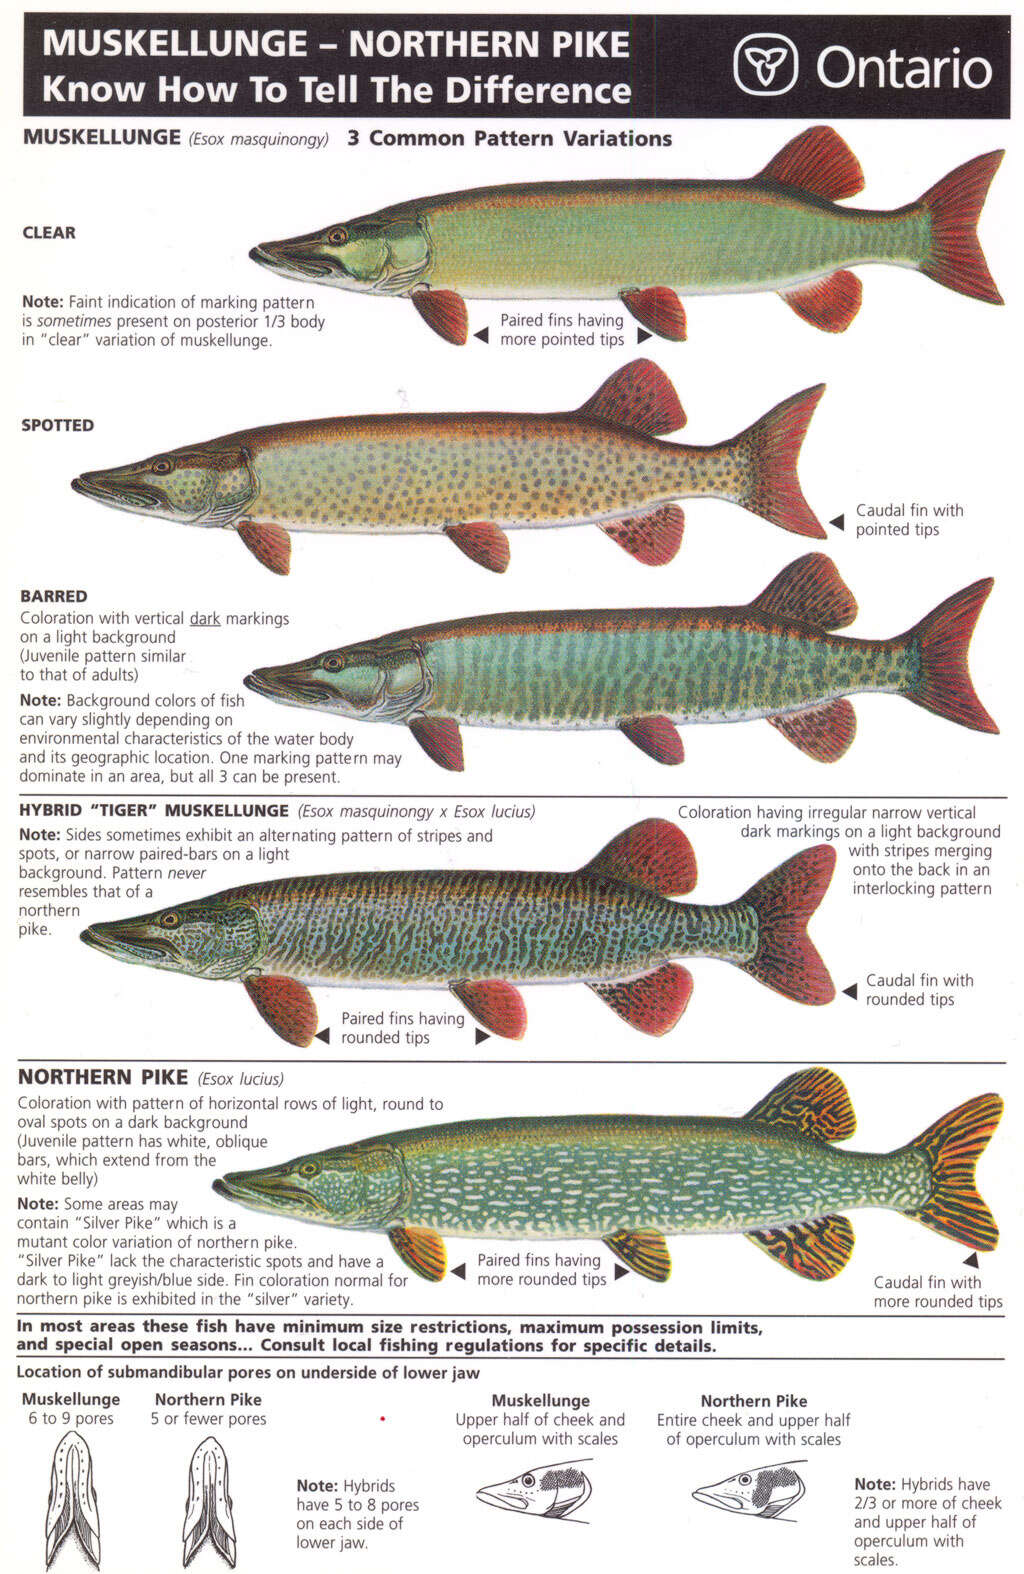 Image of Muskellunge